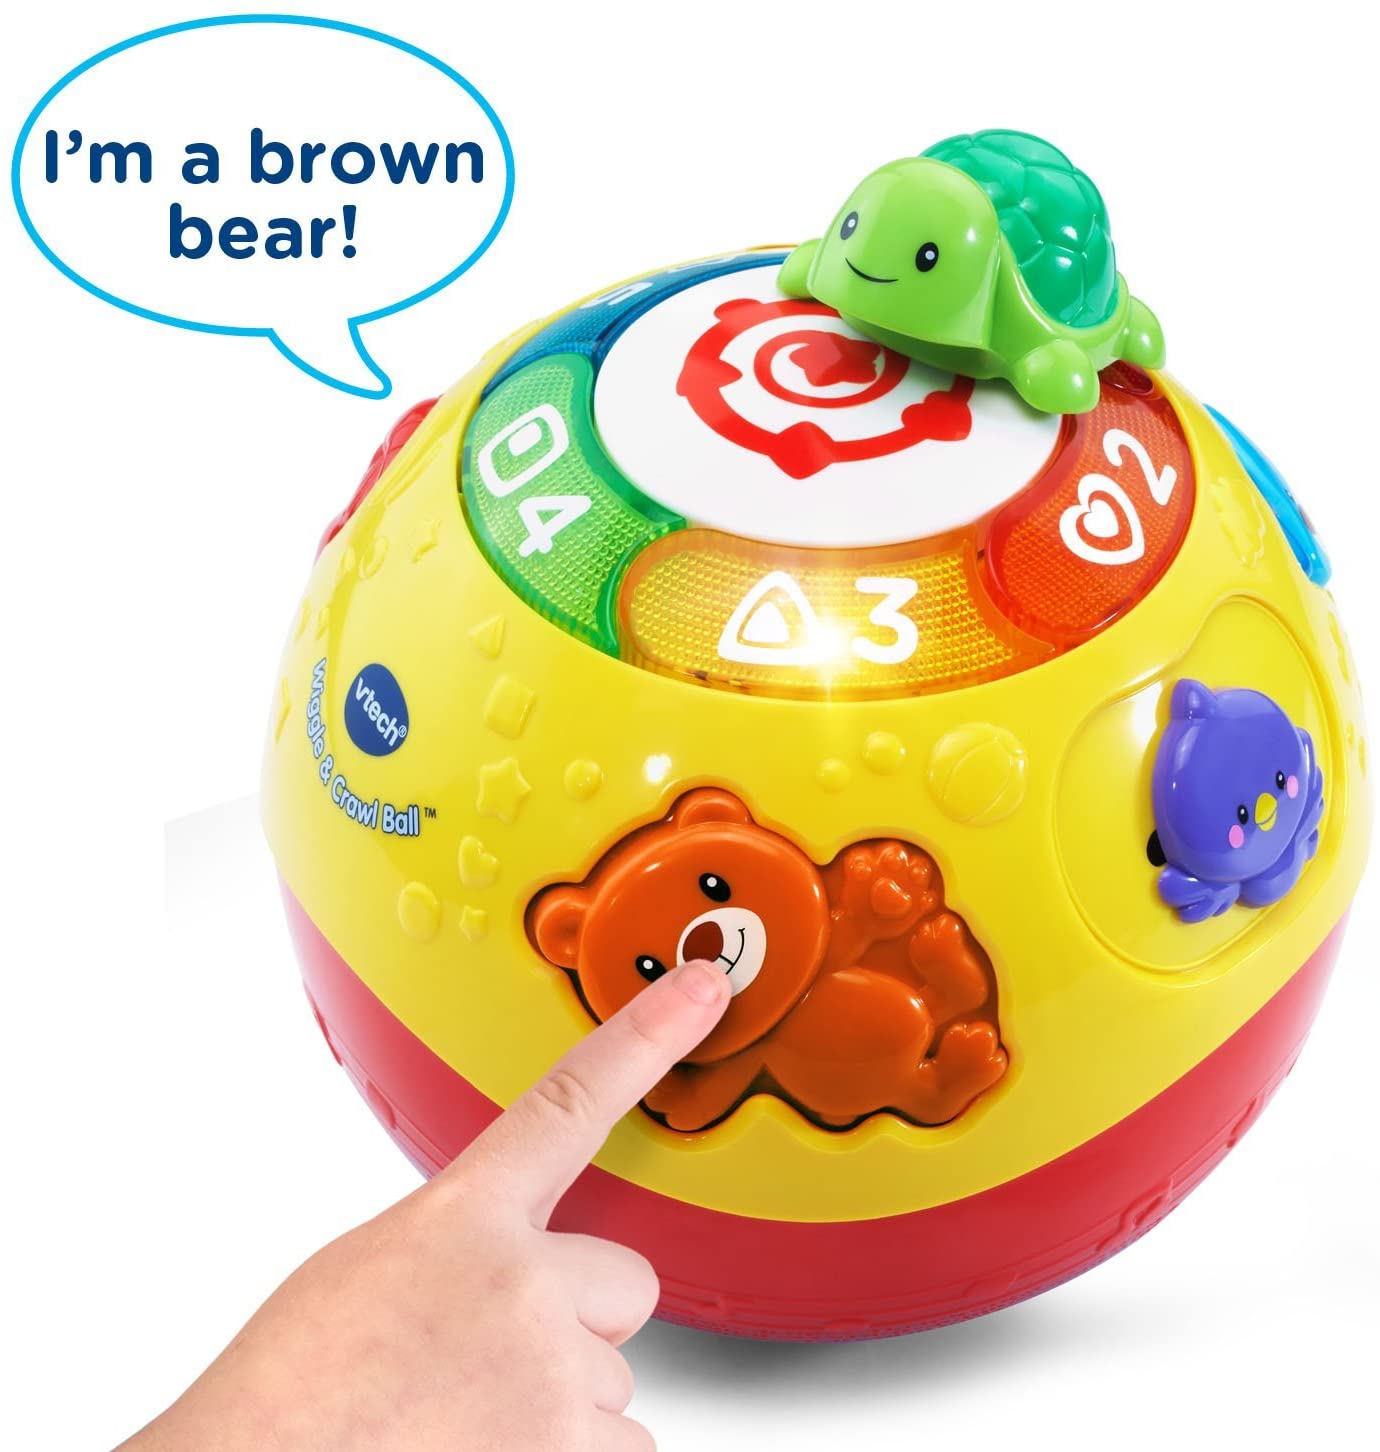 VTech Wiggle and Crawl Ball, Multicolor - with The Animal Friends